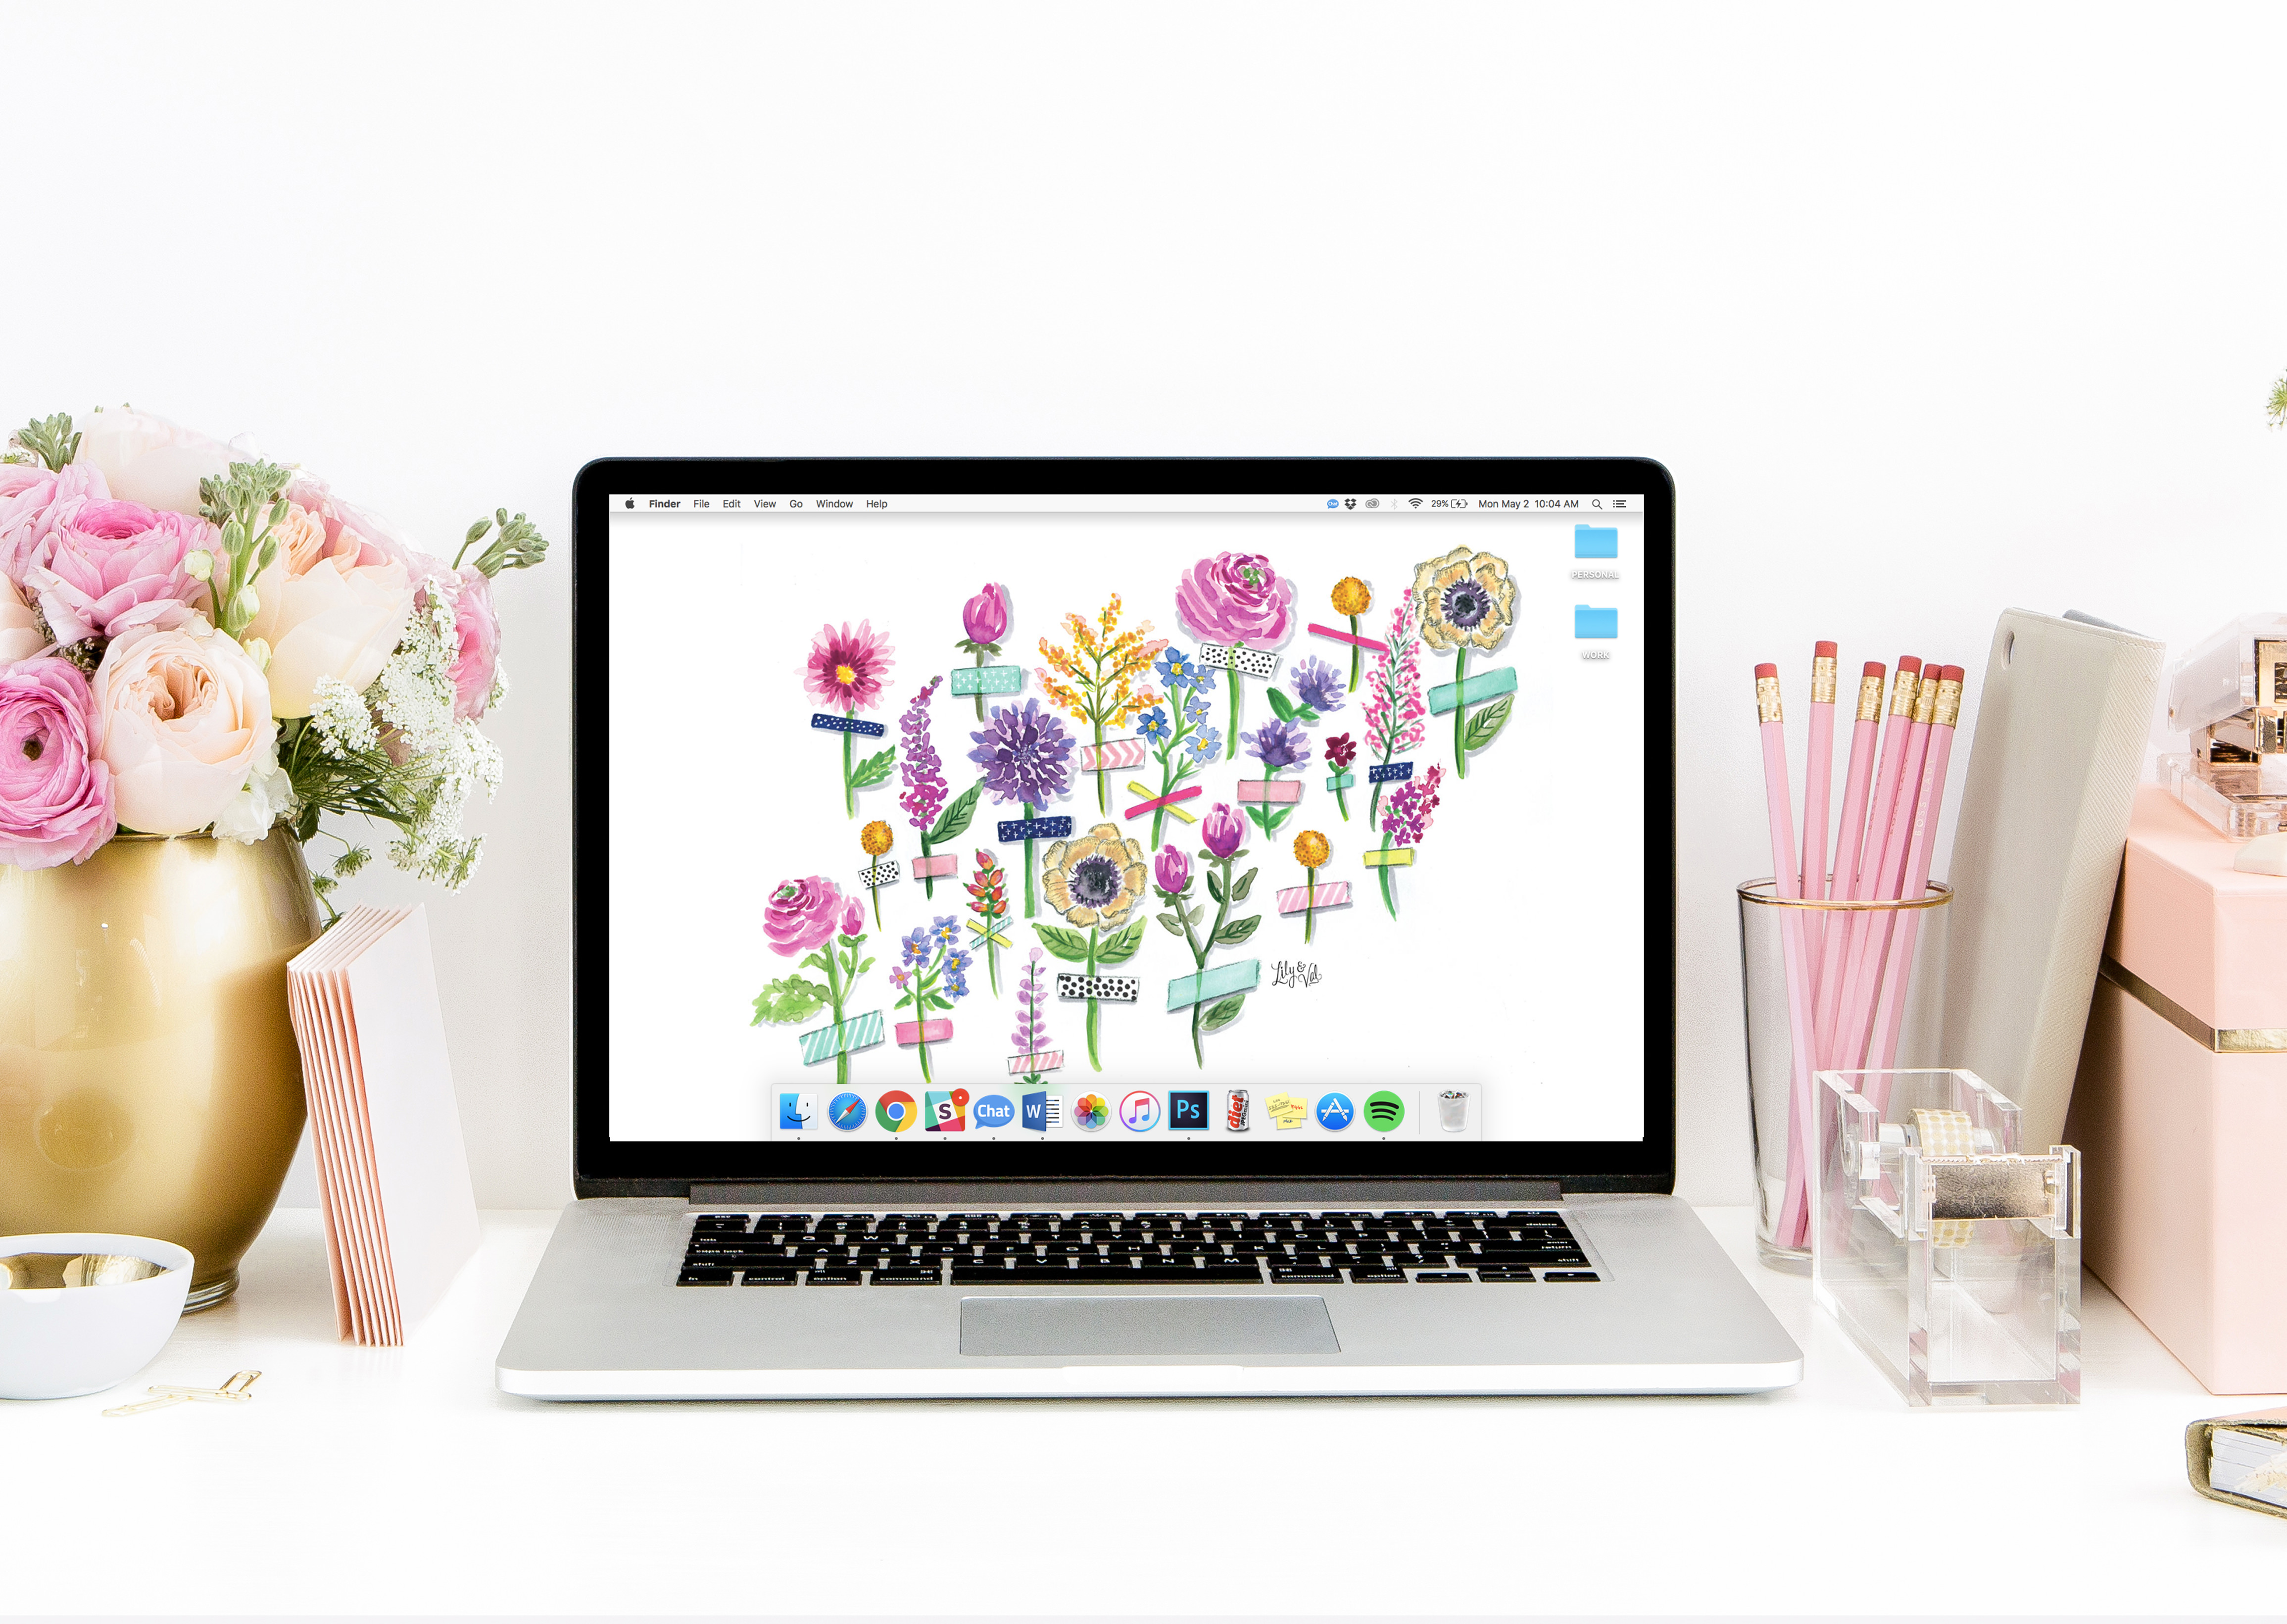 Washi tape flower art is perfect for your desktop! Visit Lily & Val Living for May's Free Download!